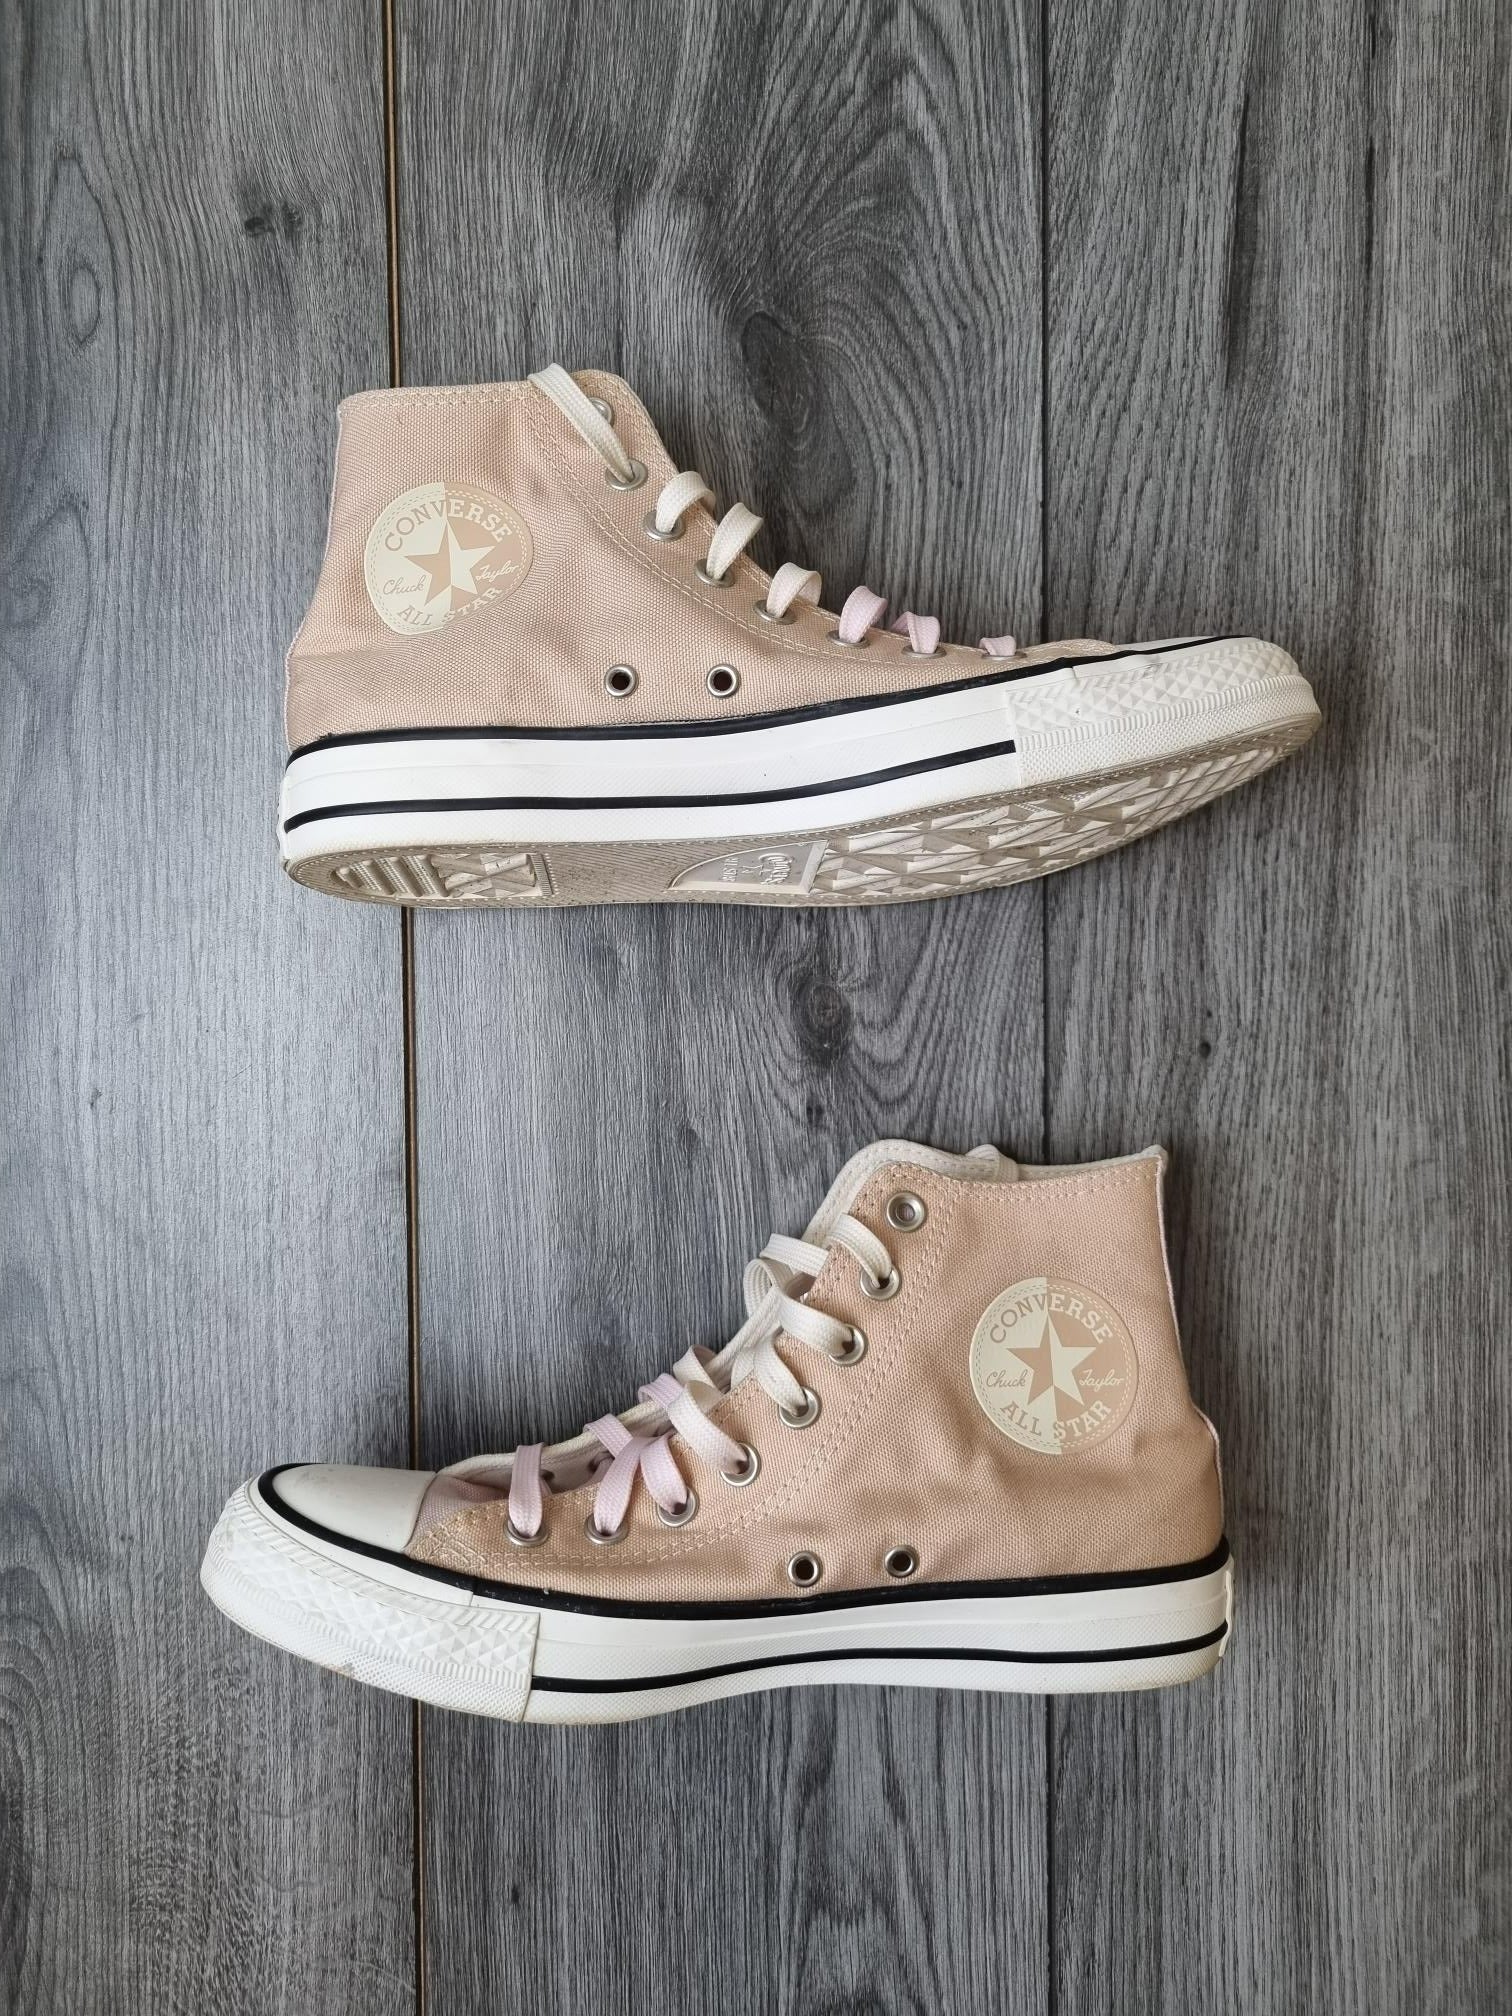 Sandalen stopverf specificatie Converse High Tops Two Tone Pink/Beige Size 7 – Shop for Shelter